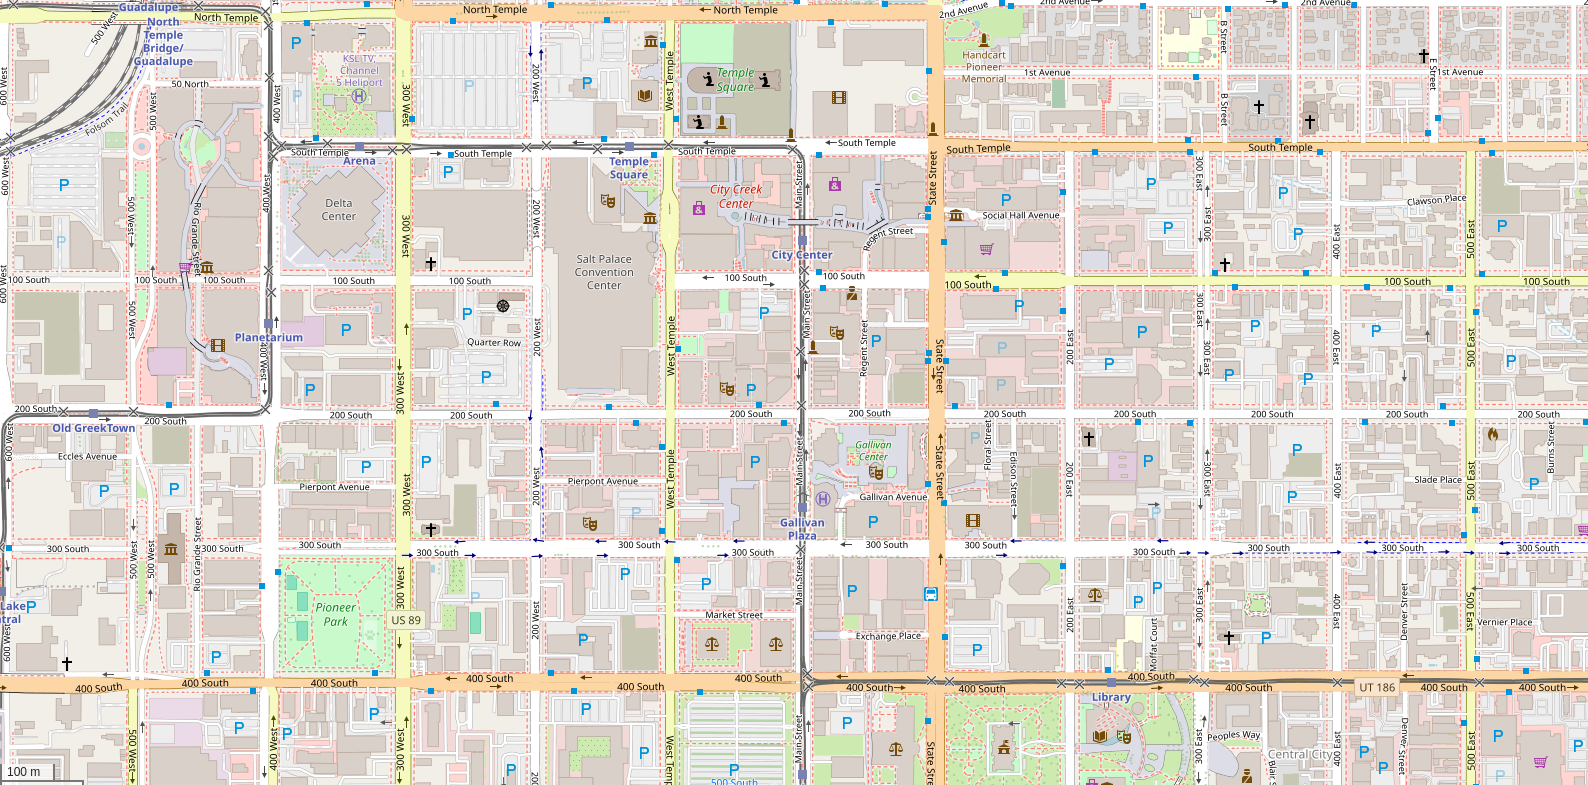 Salt Lake City on openstreetmap.org in the default (carto) style. One of the highlights of this style is using different colors for roads of different priority